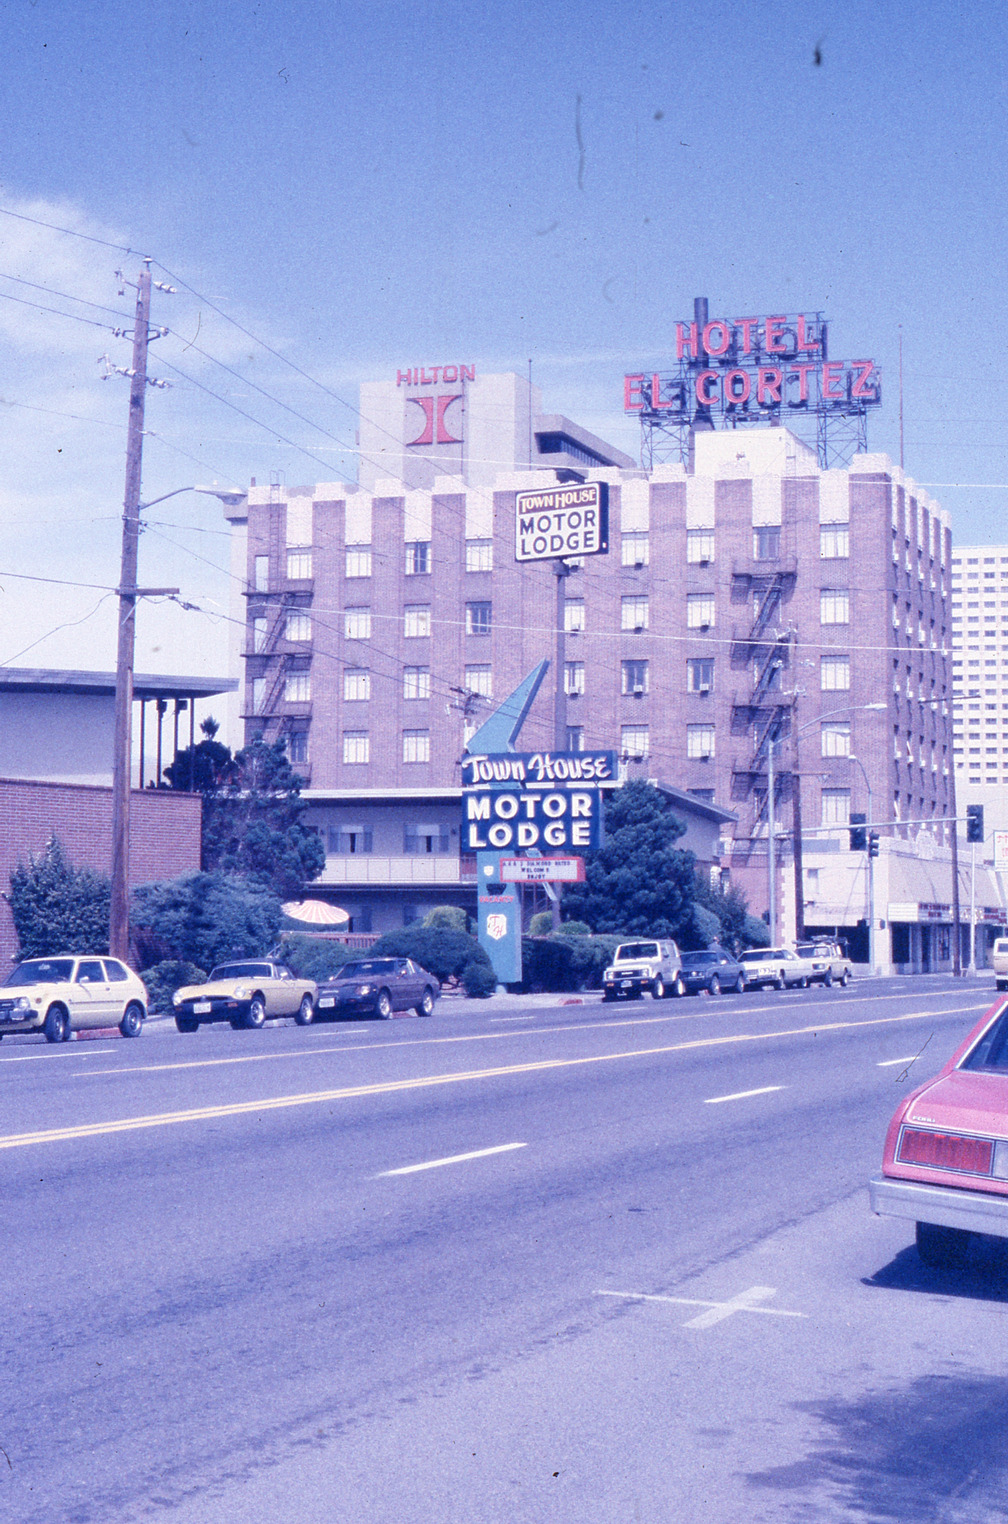 Town House Motor Lodge mounted sign, Reno, Nevada: photographic print